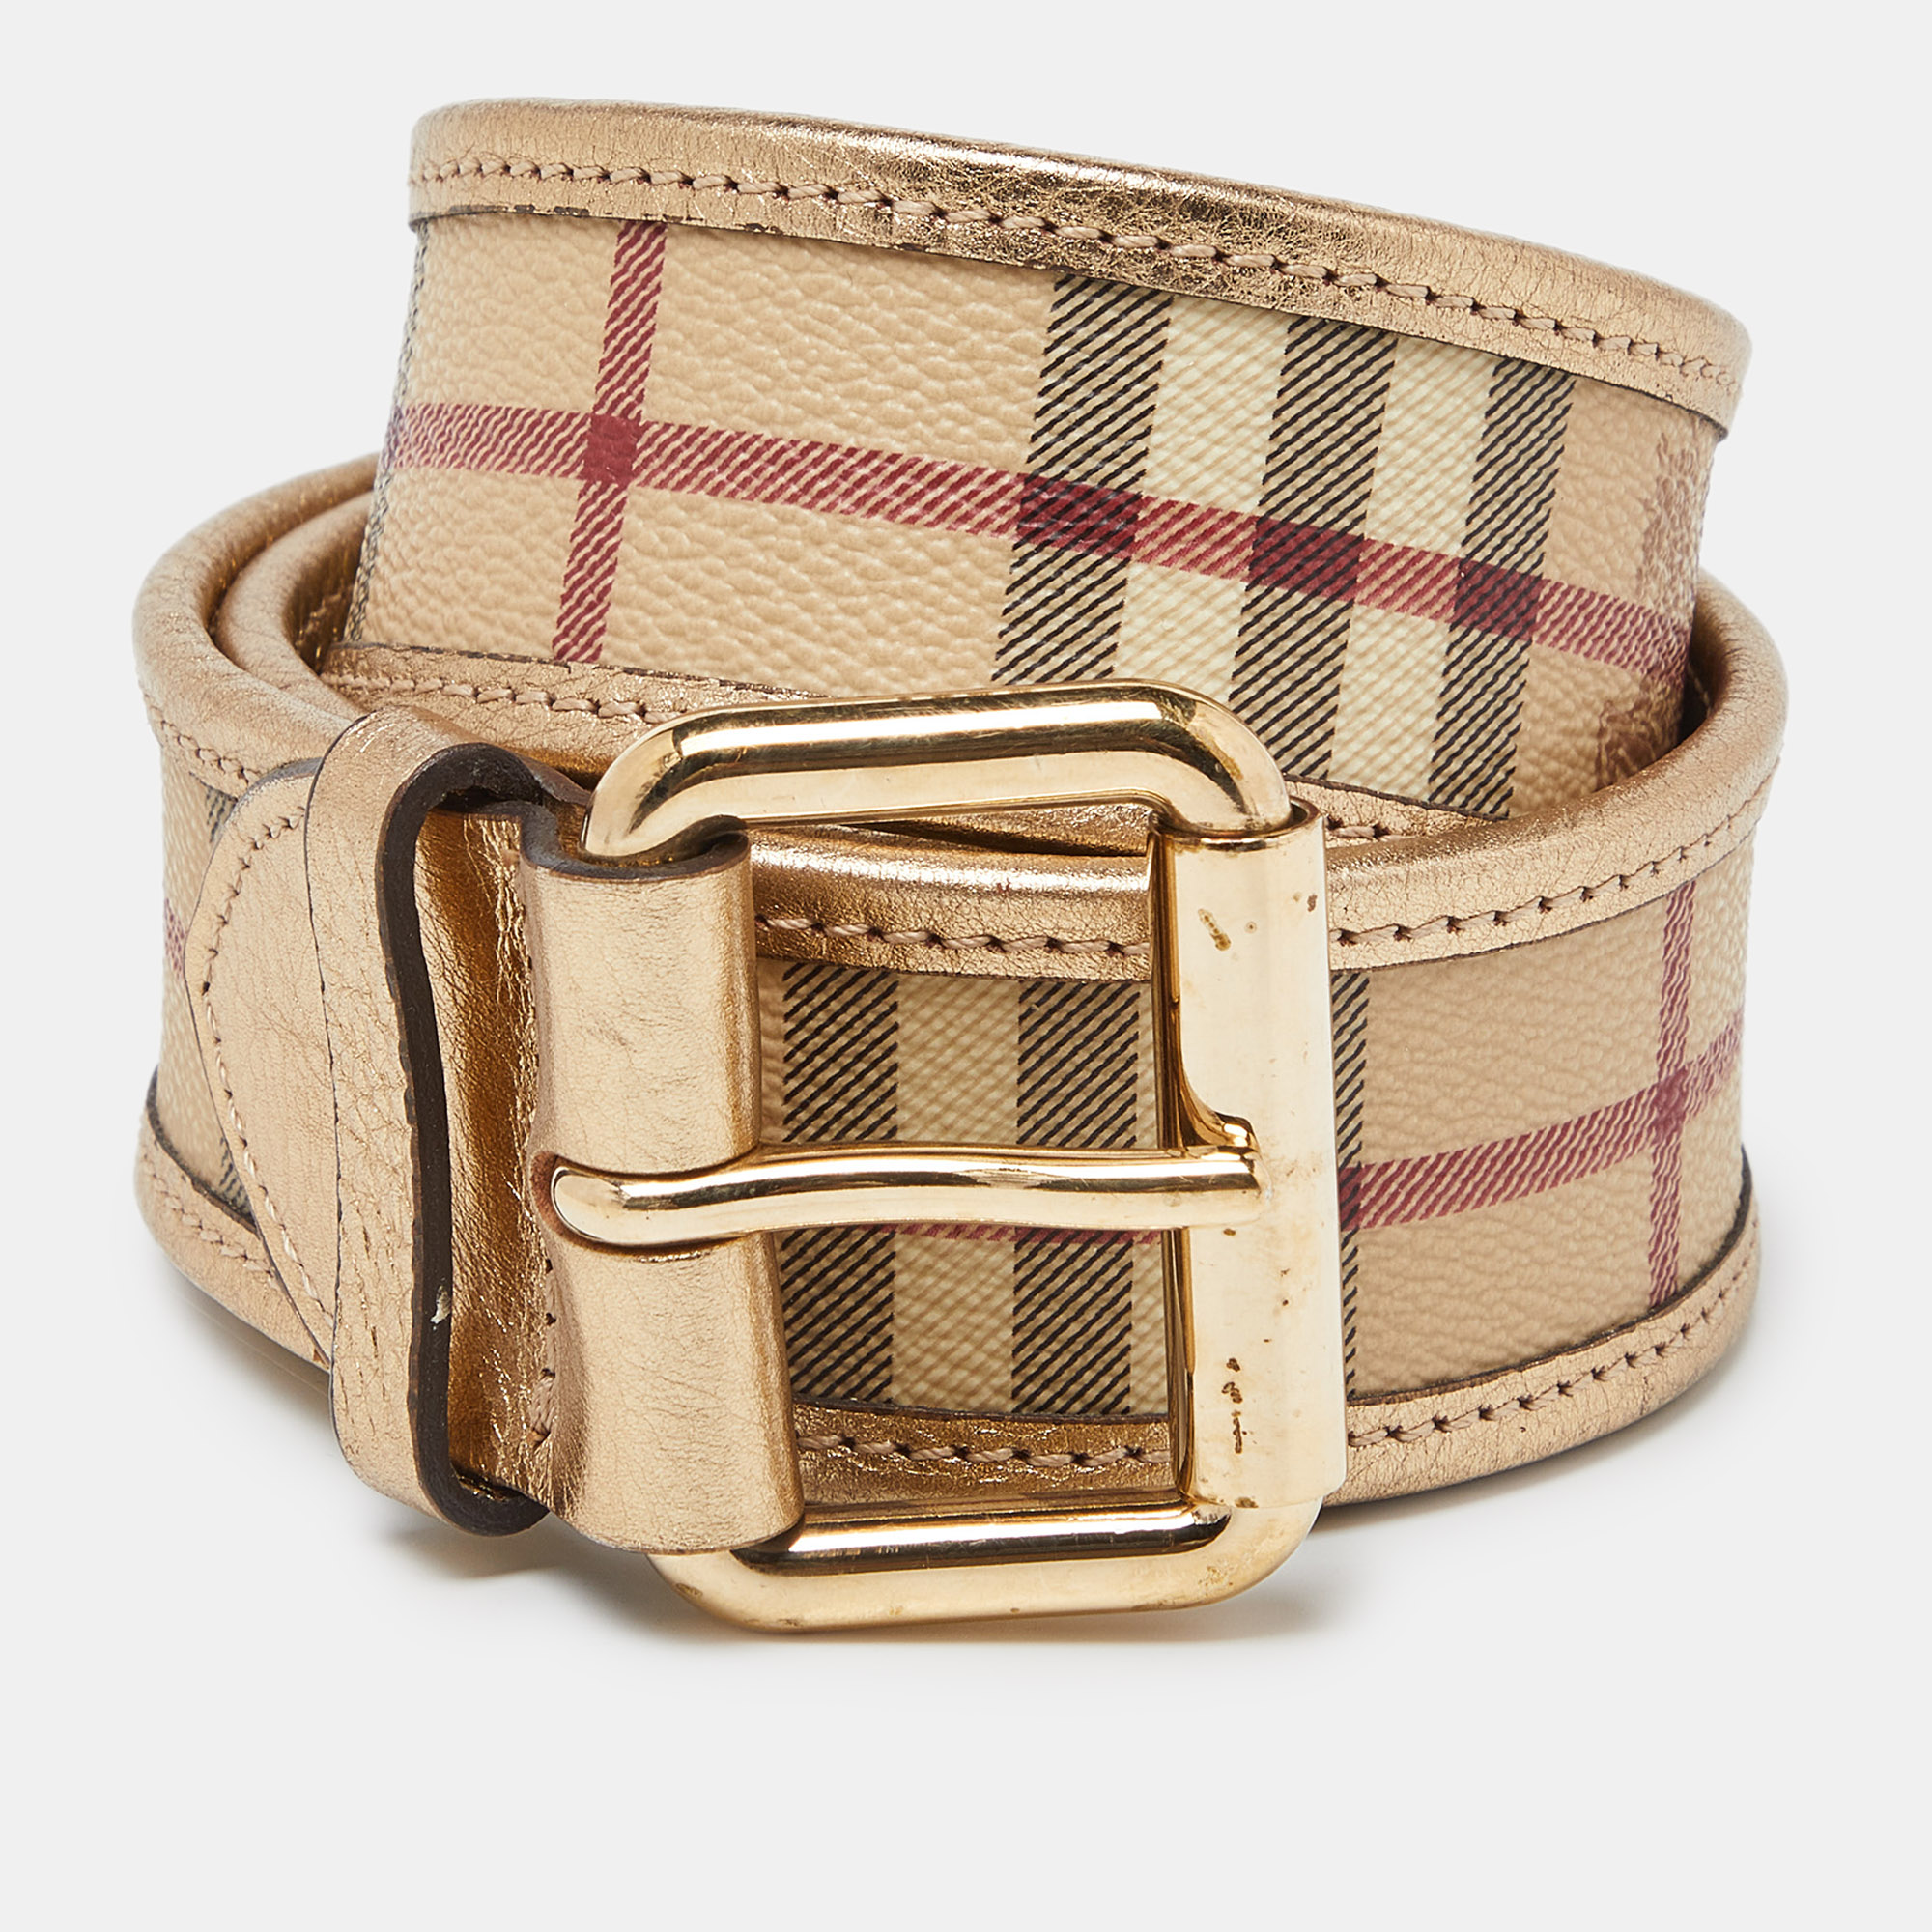 Burberry beige/gold haymarket check pvc and leather buckle belt 80cm